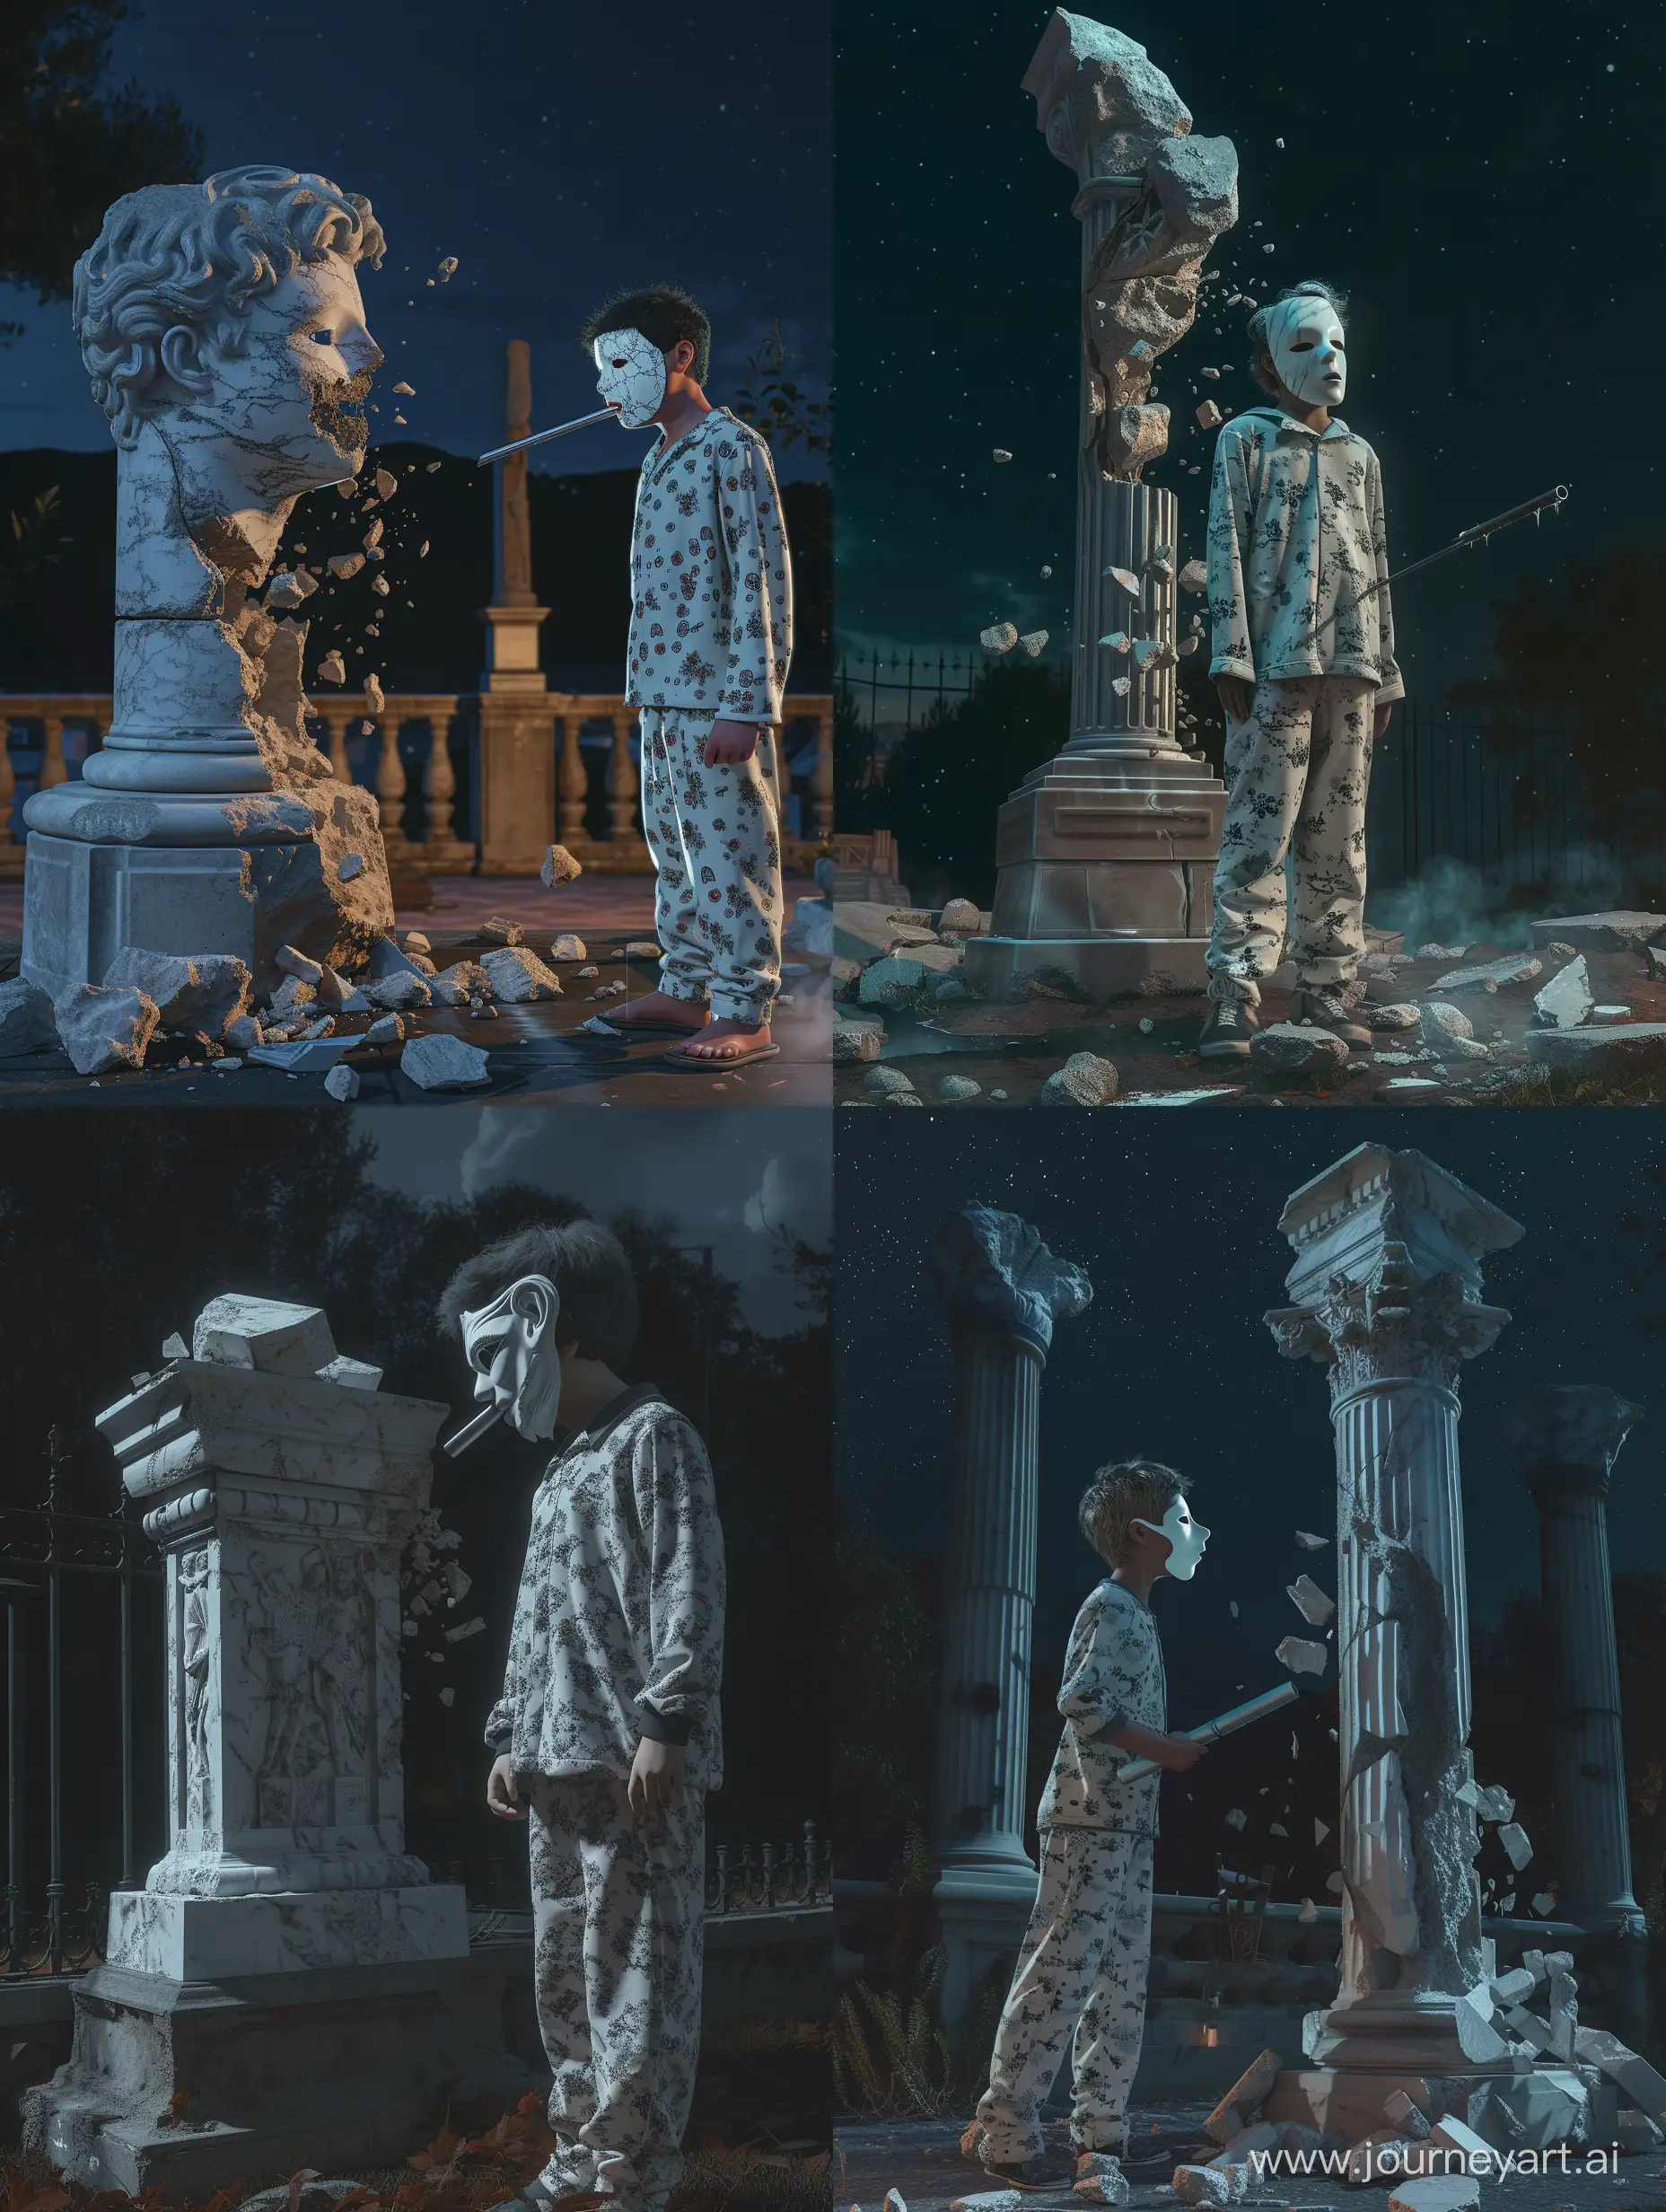 Rebellious-Teenager-in-Nighttime-Vandalism-Breaking-Monument-with-White-Marble-Mask